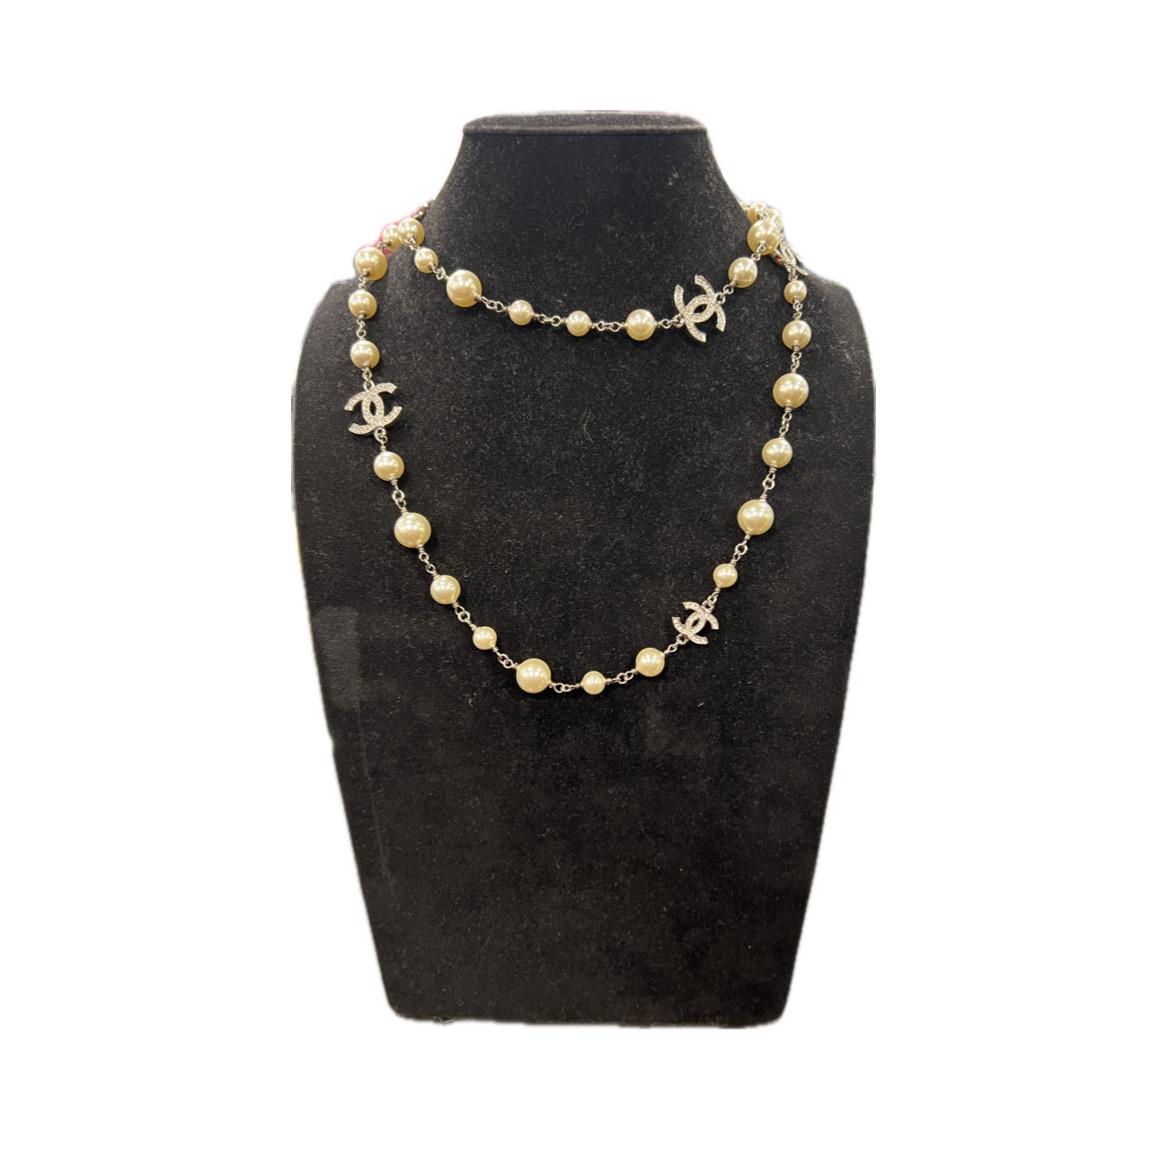 Made in France, this long Chanel long necklace is in silver metal, pearls and rhinestone CC.
It is reversible on both sides. Can be worn long or double.
Stamp on clasp.
Total length: 108 cm, CC in stass 2 sizes: 2 x 1.5 cm and 1.5 x 1 cm.
Il will be